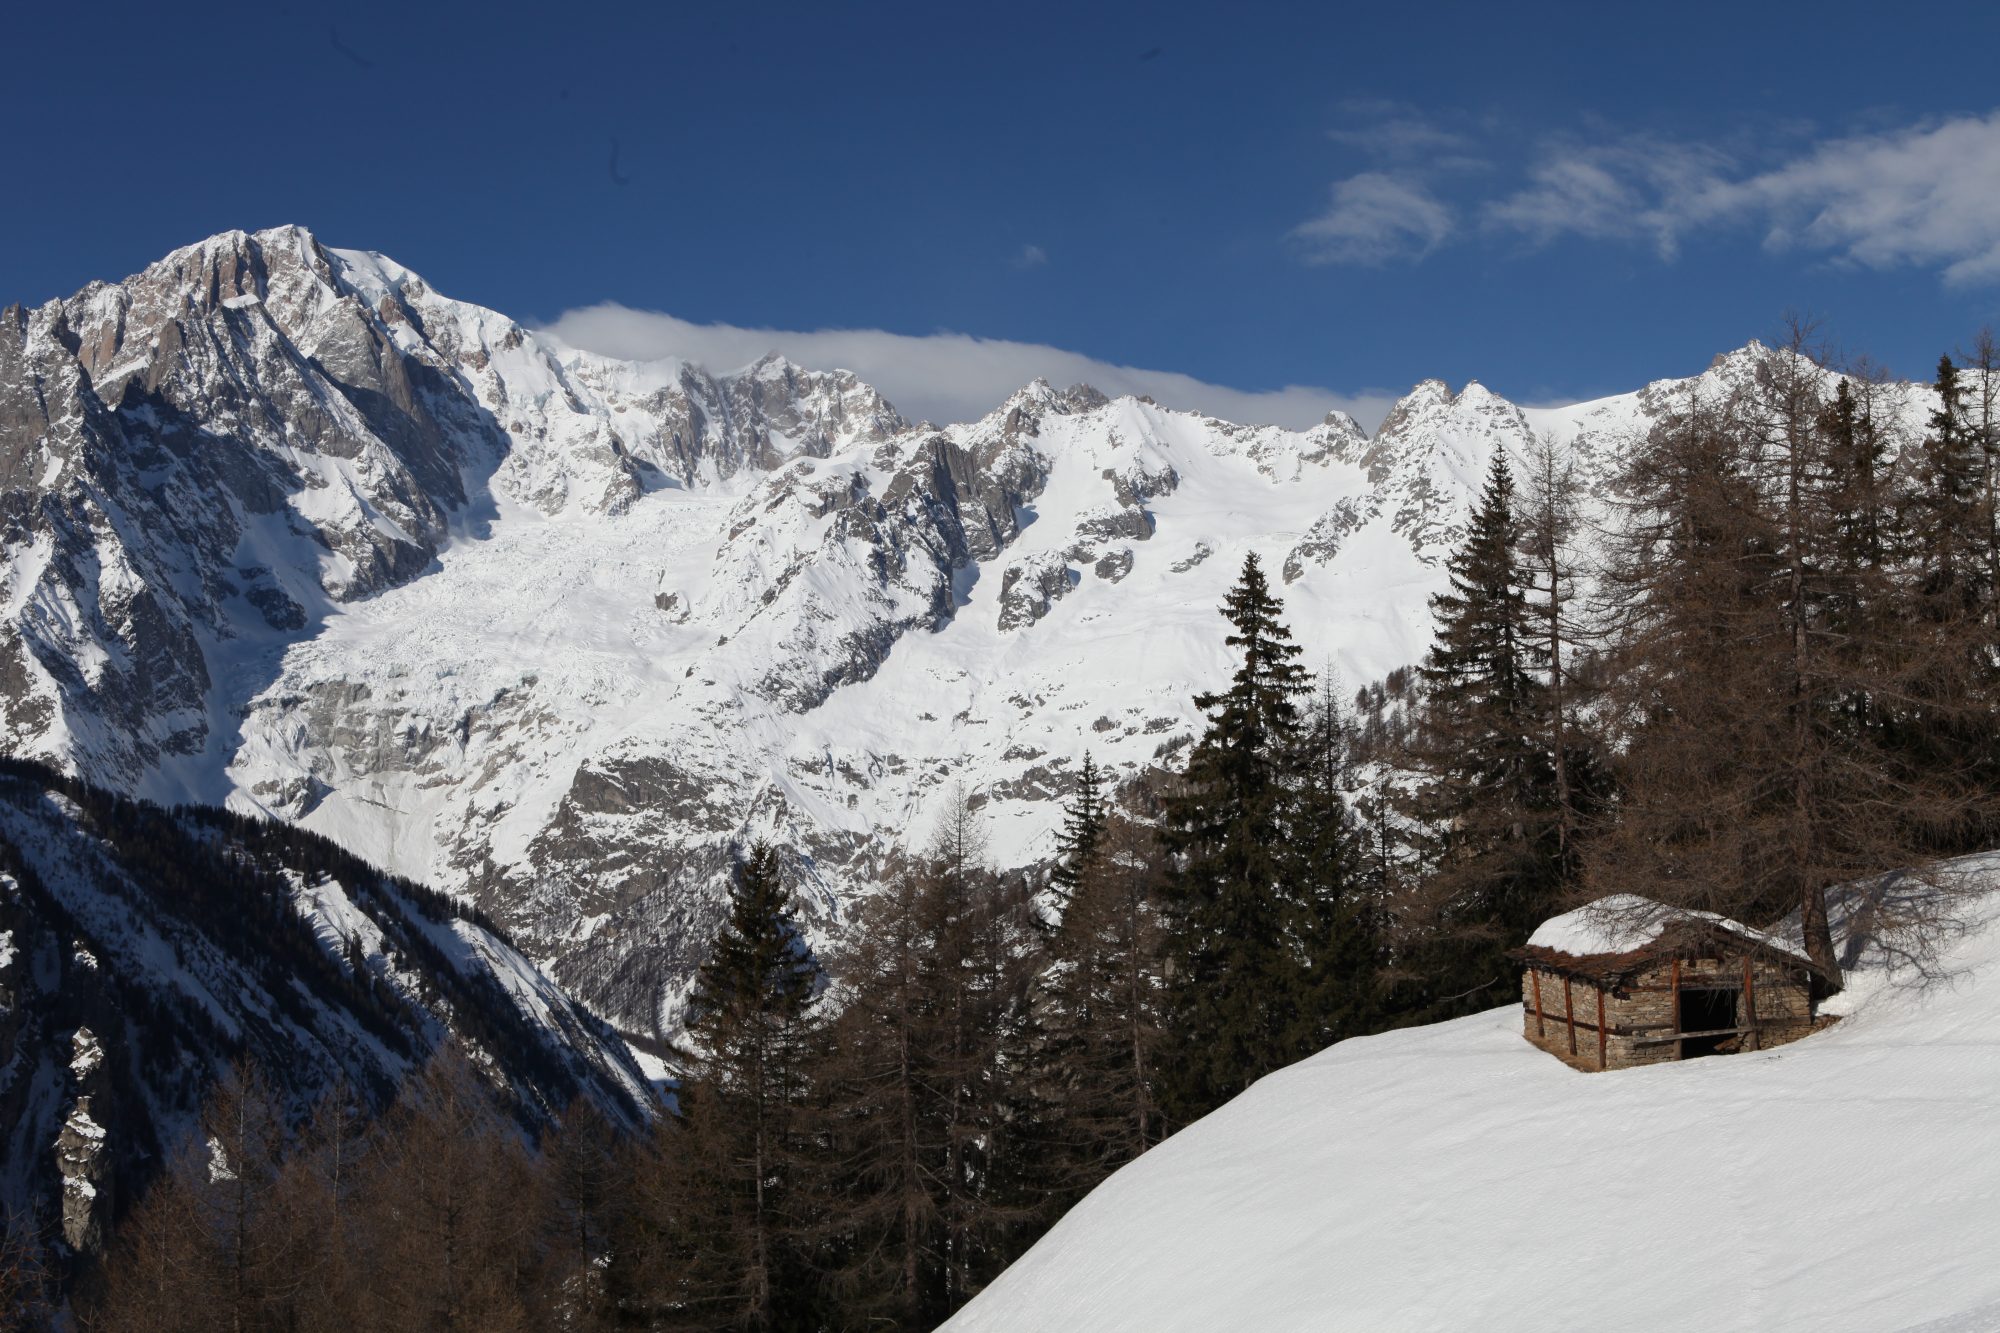 Photo credit: Antonio Furino - Courmayeur, Courmayeur - Ski Italy, Ski Aosta, Mont Blanc, Italy at its Peak. Courmayeur Mont Blanc Funivie is opening two new slopes with amazing panoramic views.